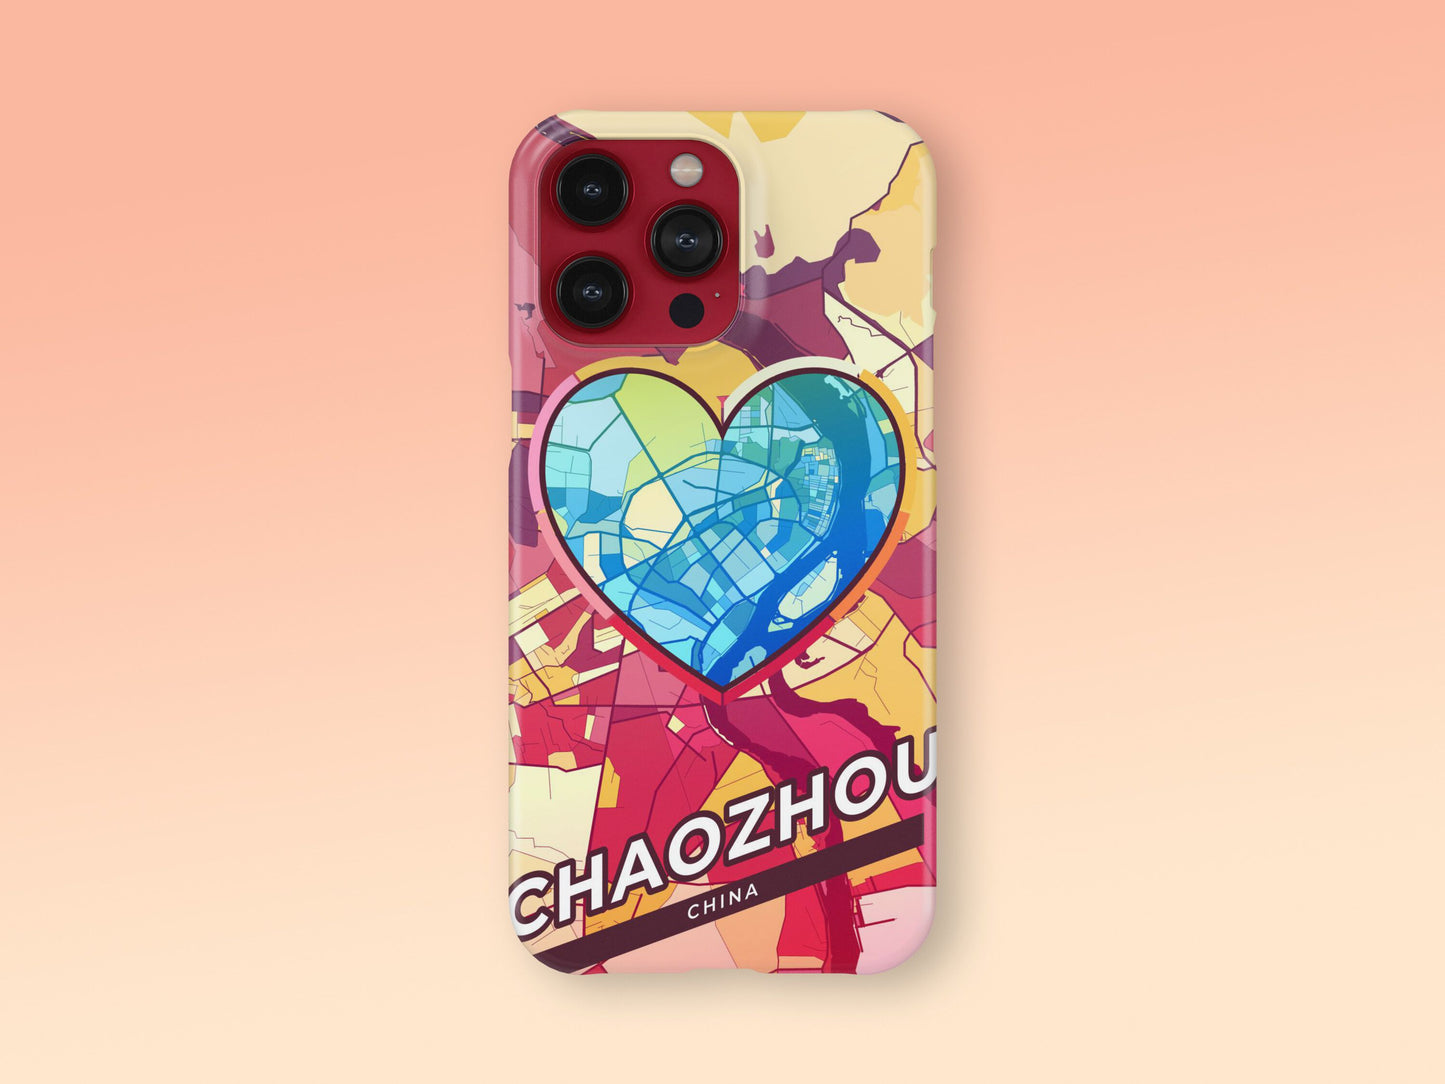 Chaozhou China slim phone case with colorful icon. Birthday, wedding or housewarming gift. Couple match cases. 2